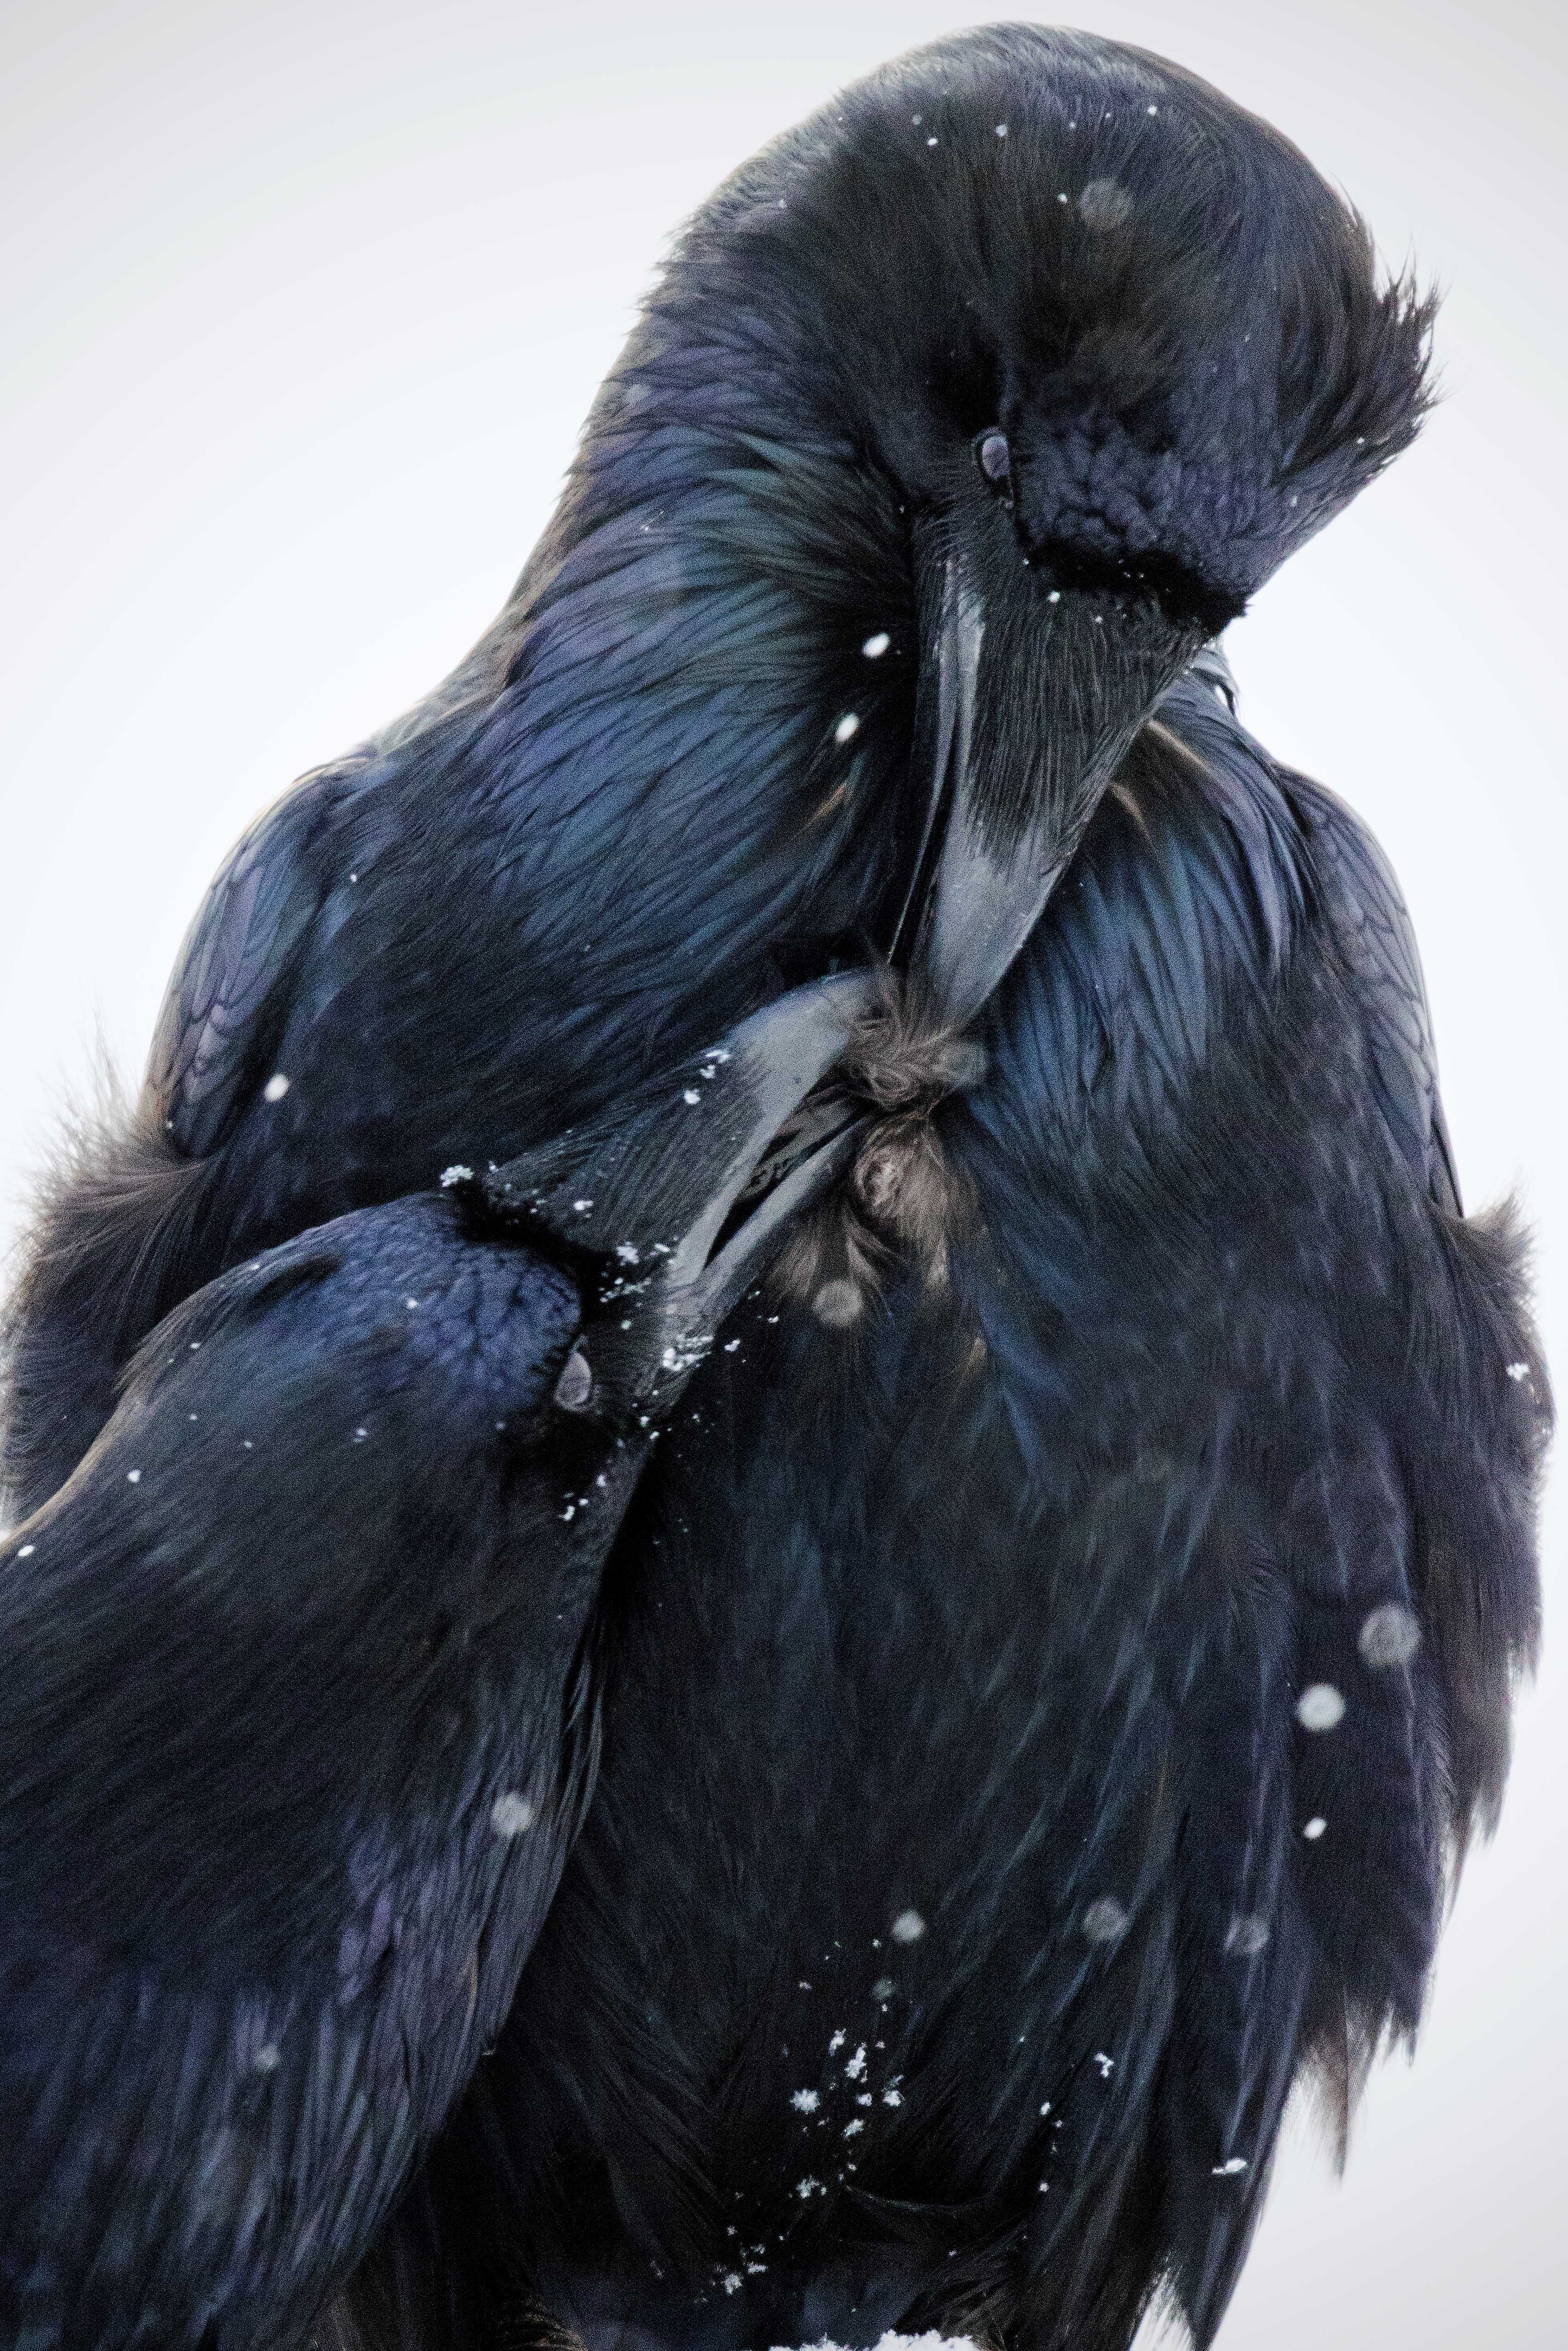 Northern Raven (Corvus corax) adult, in a light snow flurry, with 10 month old juvenile.